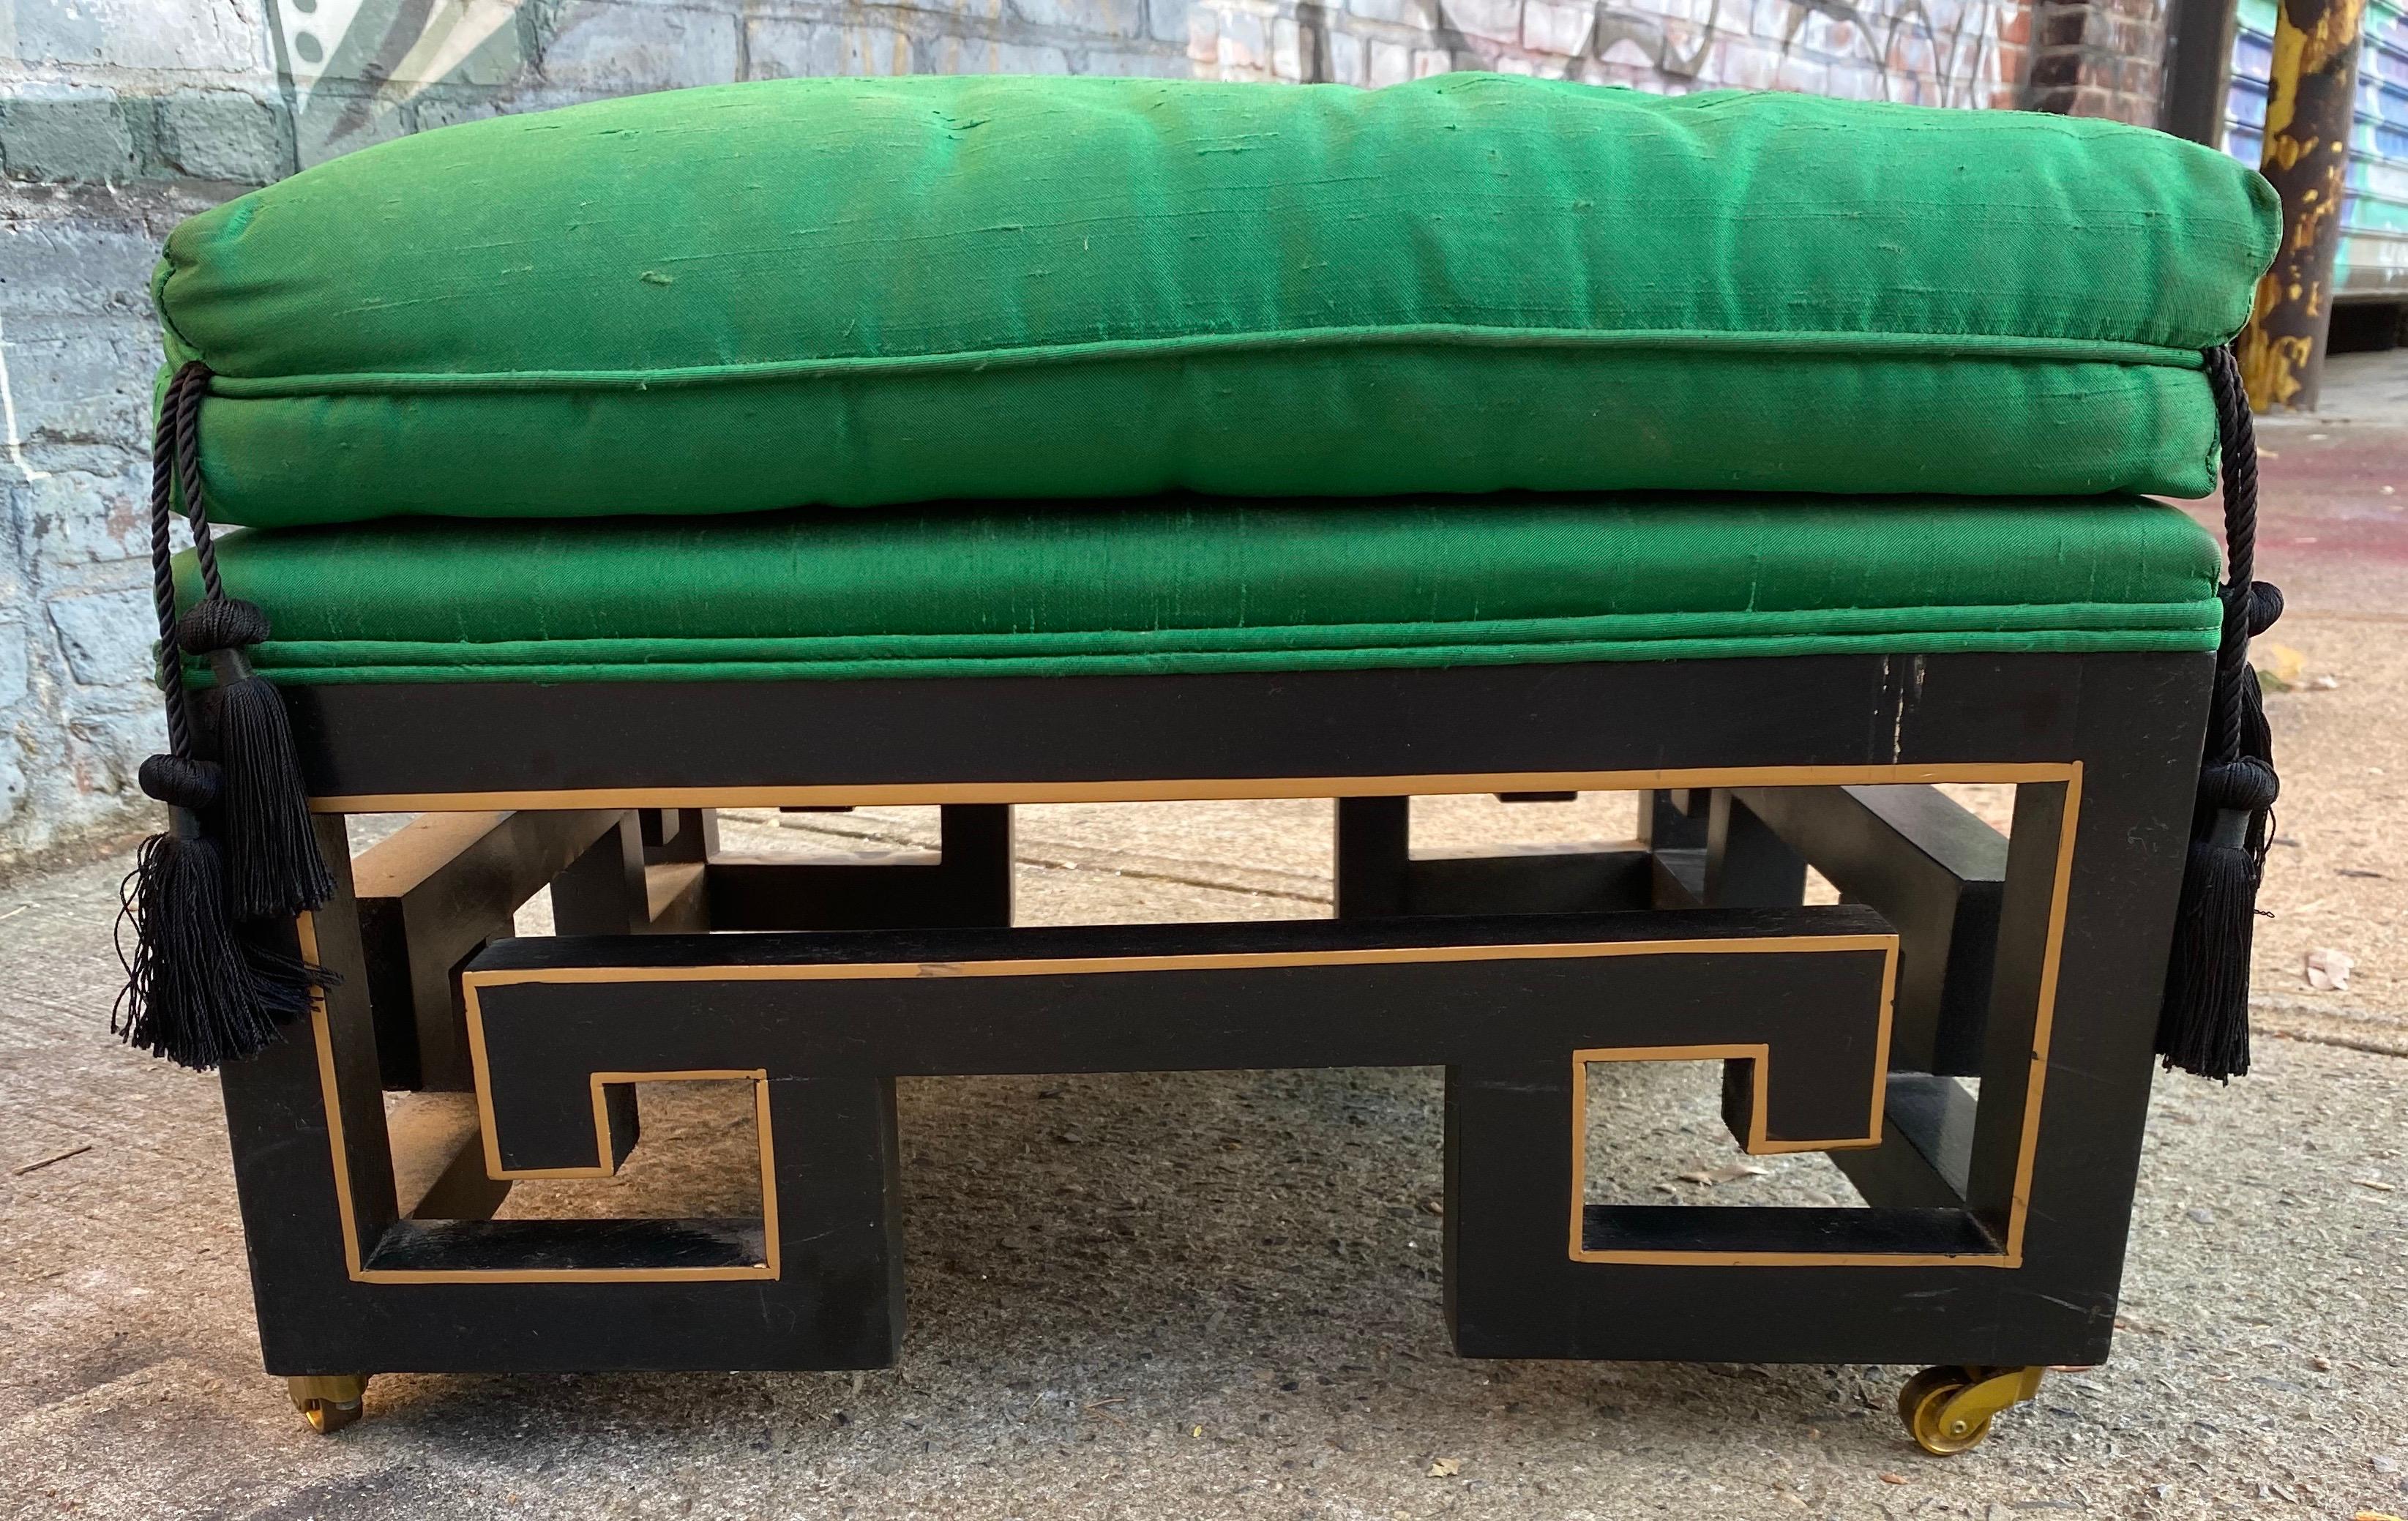 James Mont style Chinese Asian black green stool midcentury. Black lacquer Chinese inspired design with green silk cushions with tassels. Dated 1960 measures 21” x 21” x 15” H on brass casters.